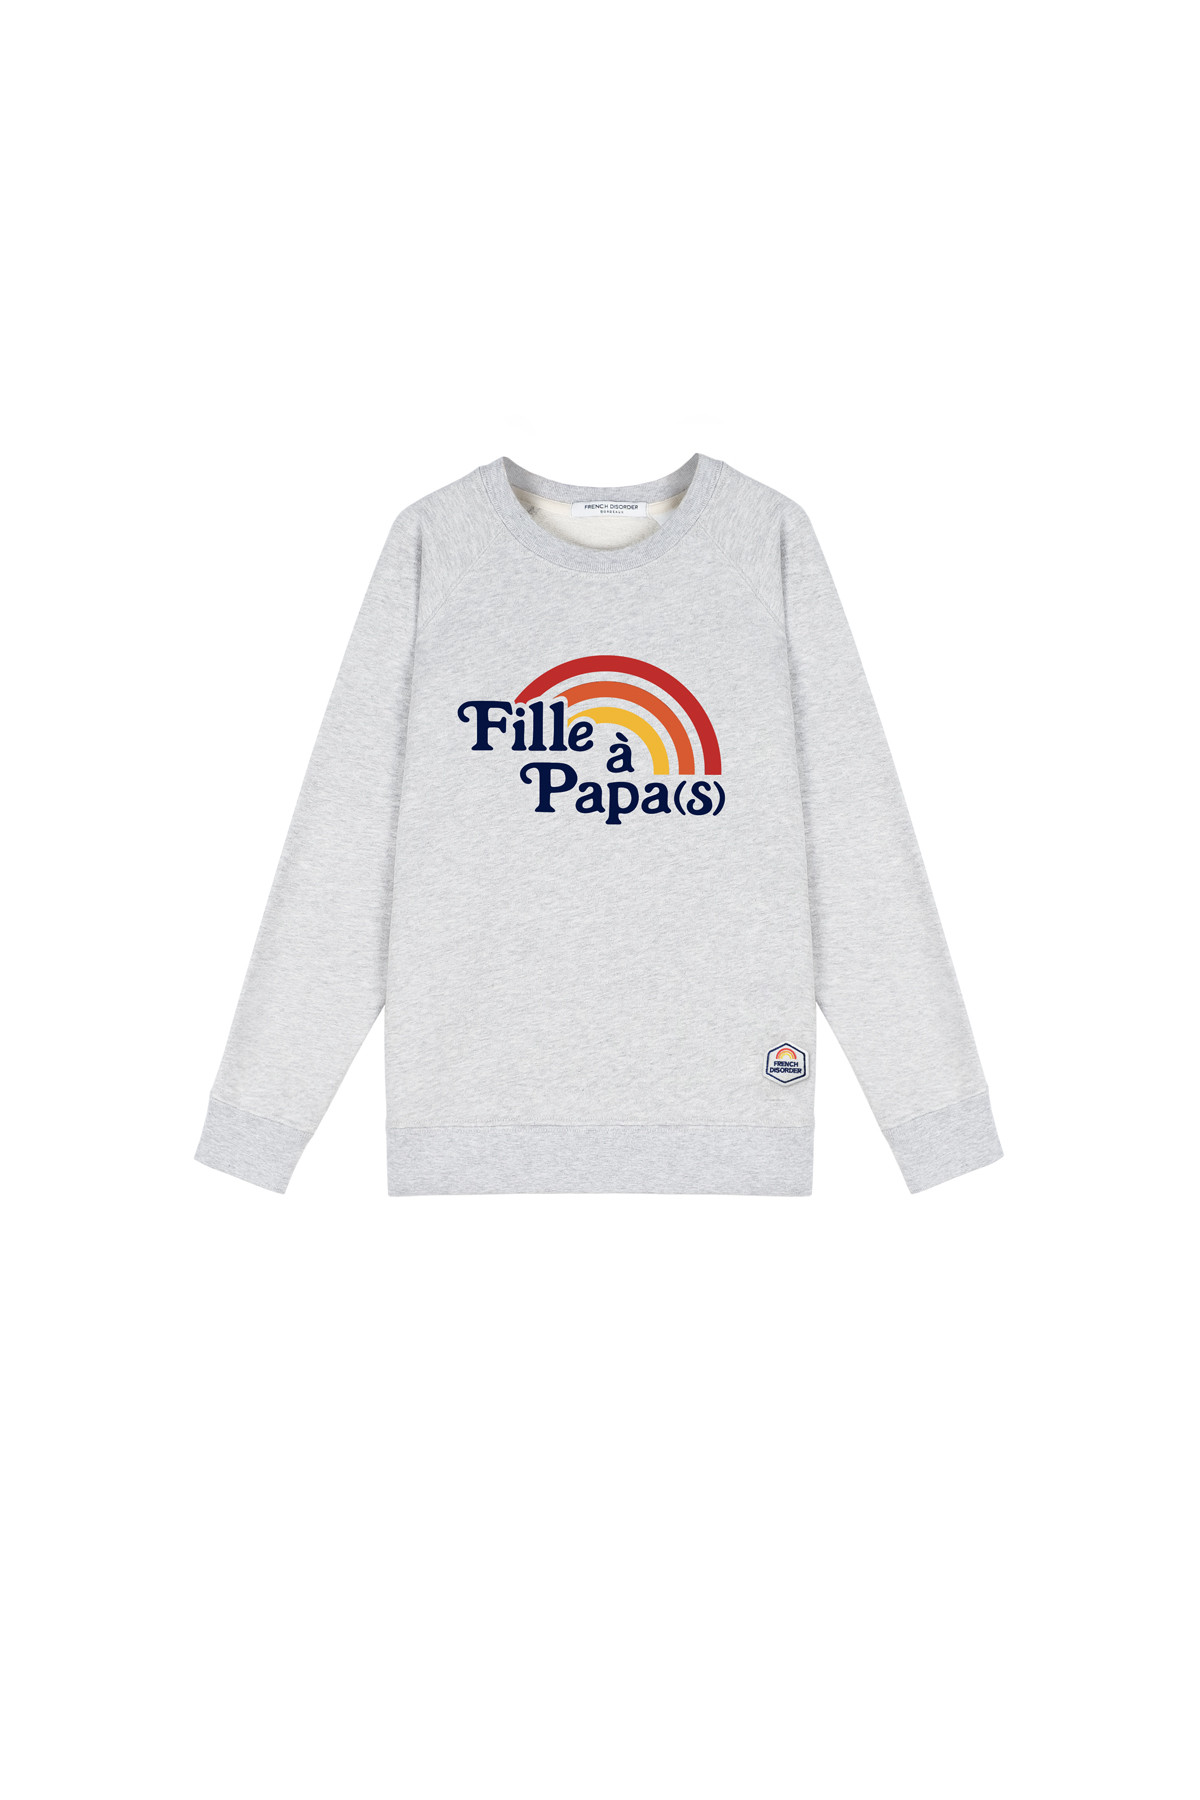 Sweat enfant FILLE A PAPA(S) French Disorder